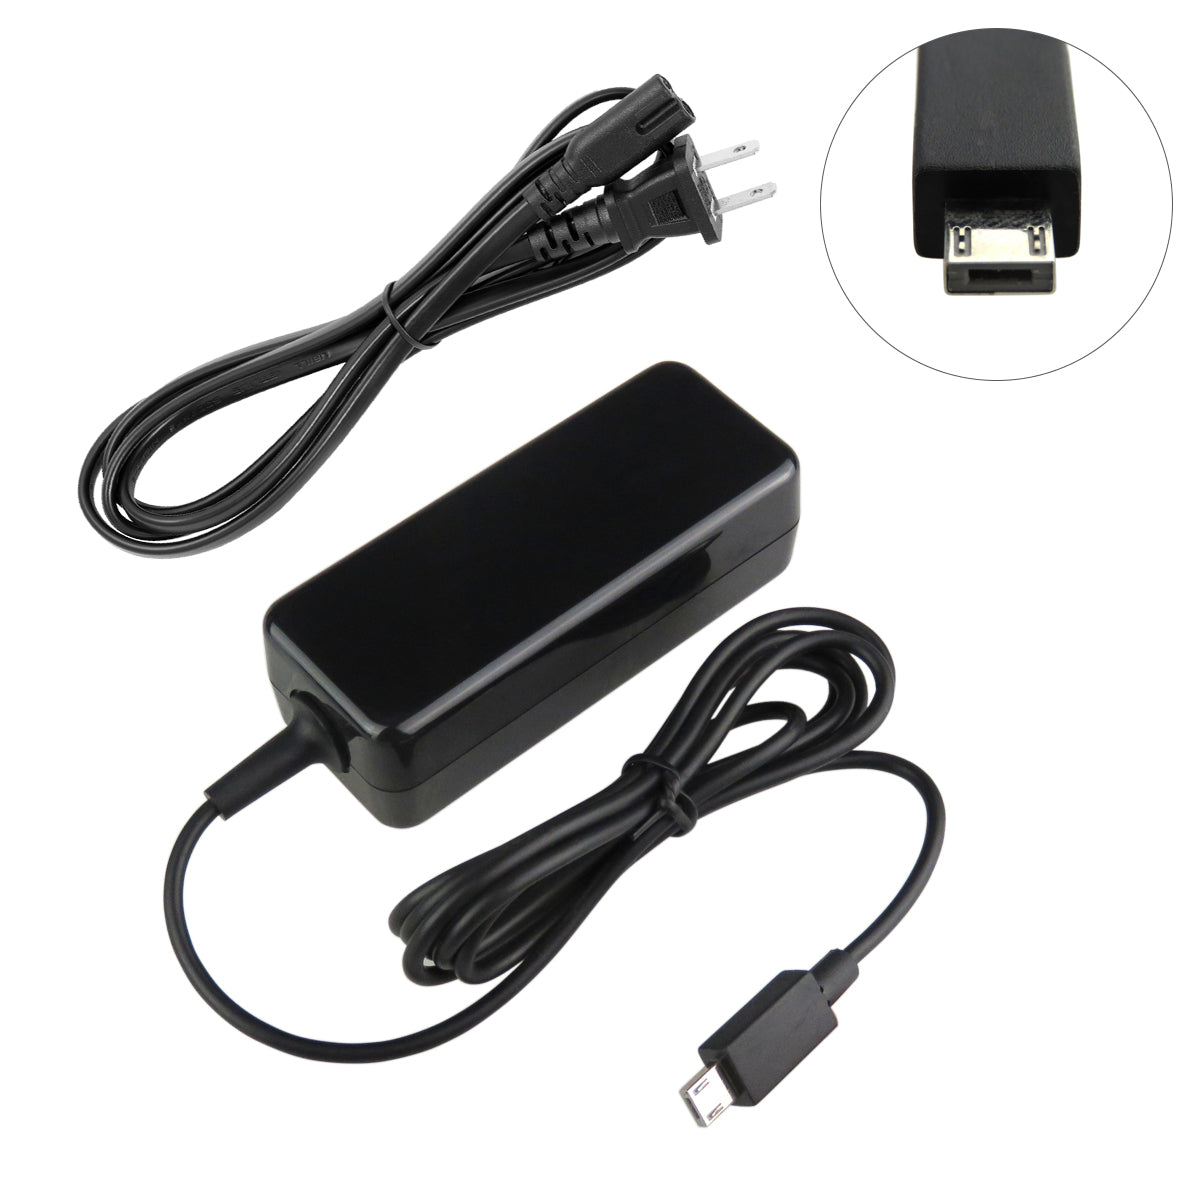 Charger for ASUS EeeBook F205TA Laptop.